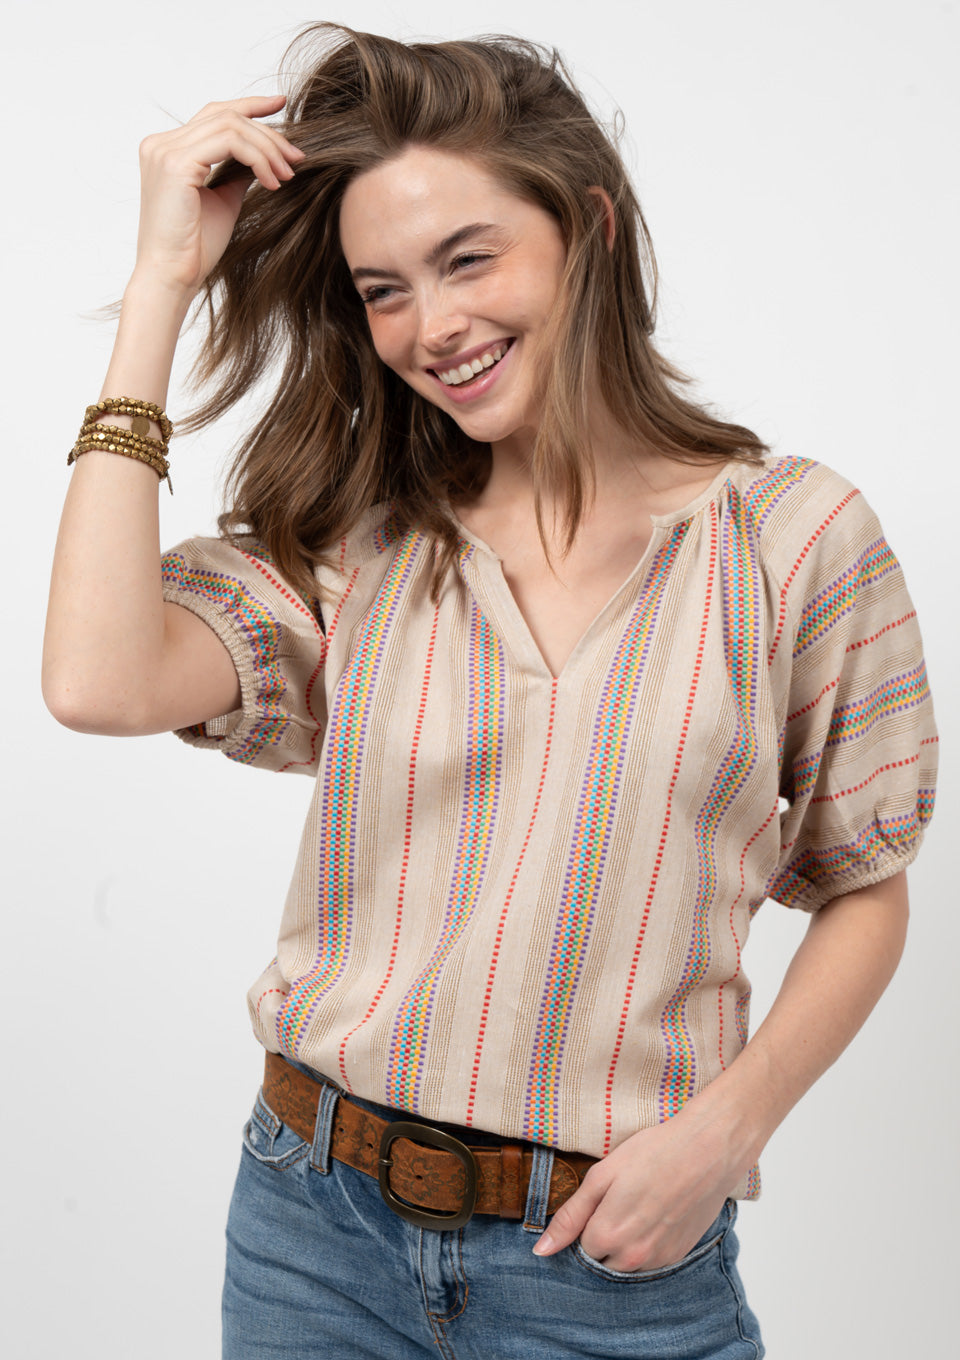 Primary Striped Top